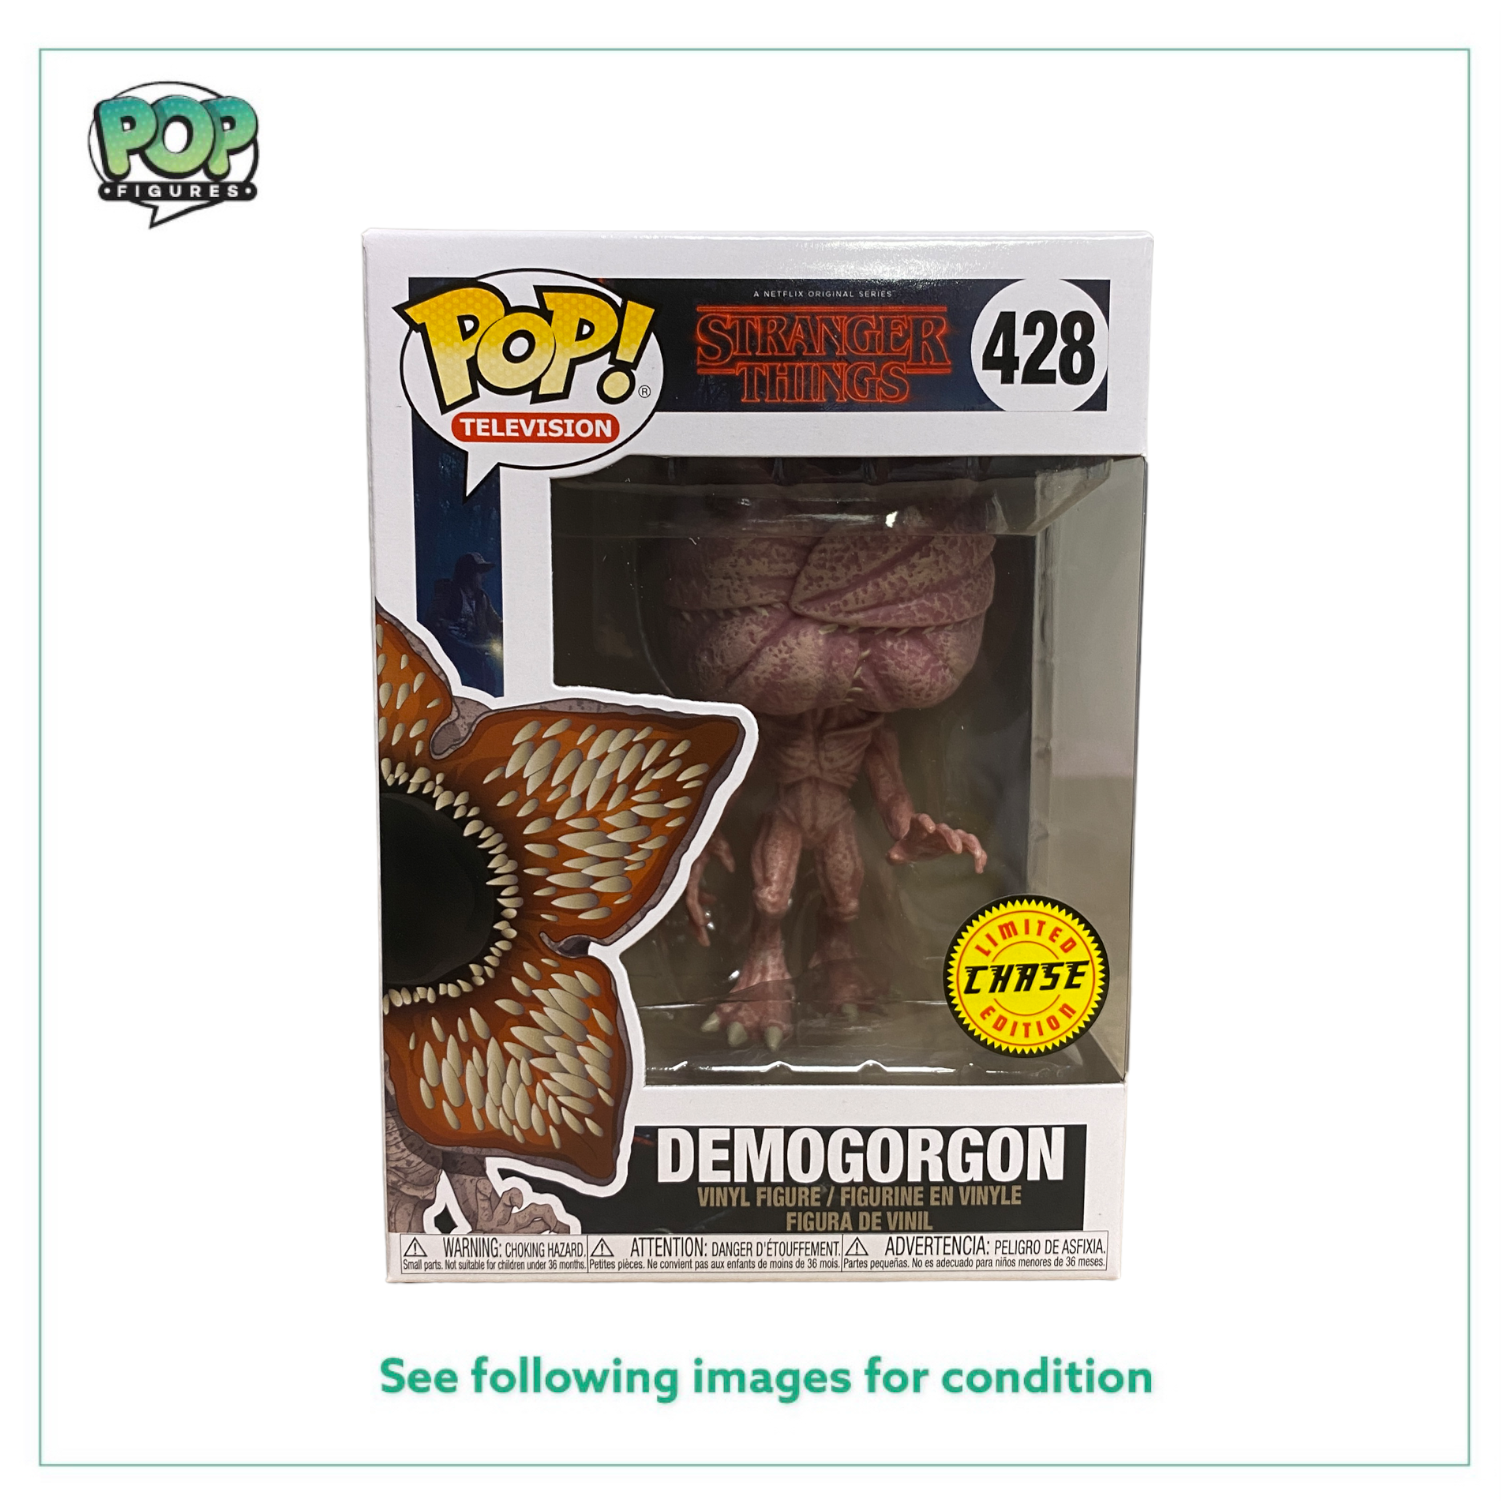 Demogorgon #428 (Closed Mouth Chase) Funko Pop! - Stranger Things - 2022 Pop! - Condition 9.5/10